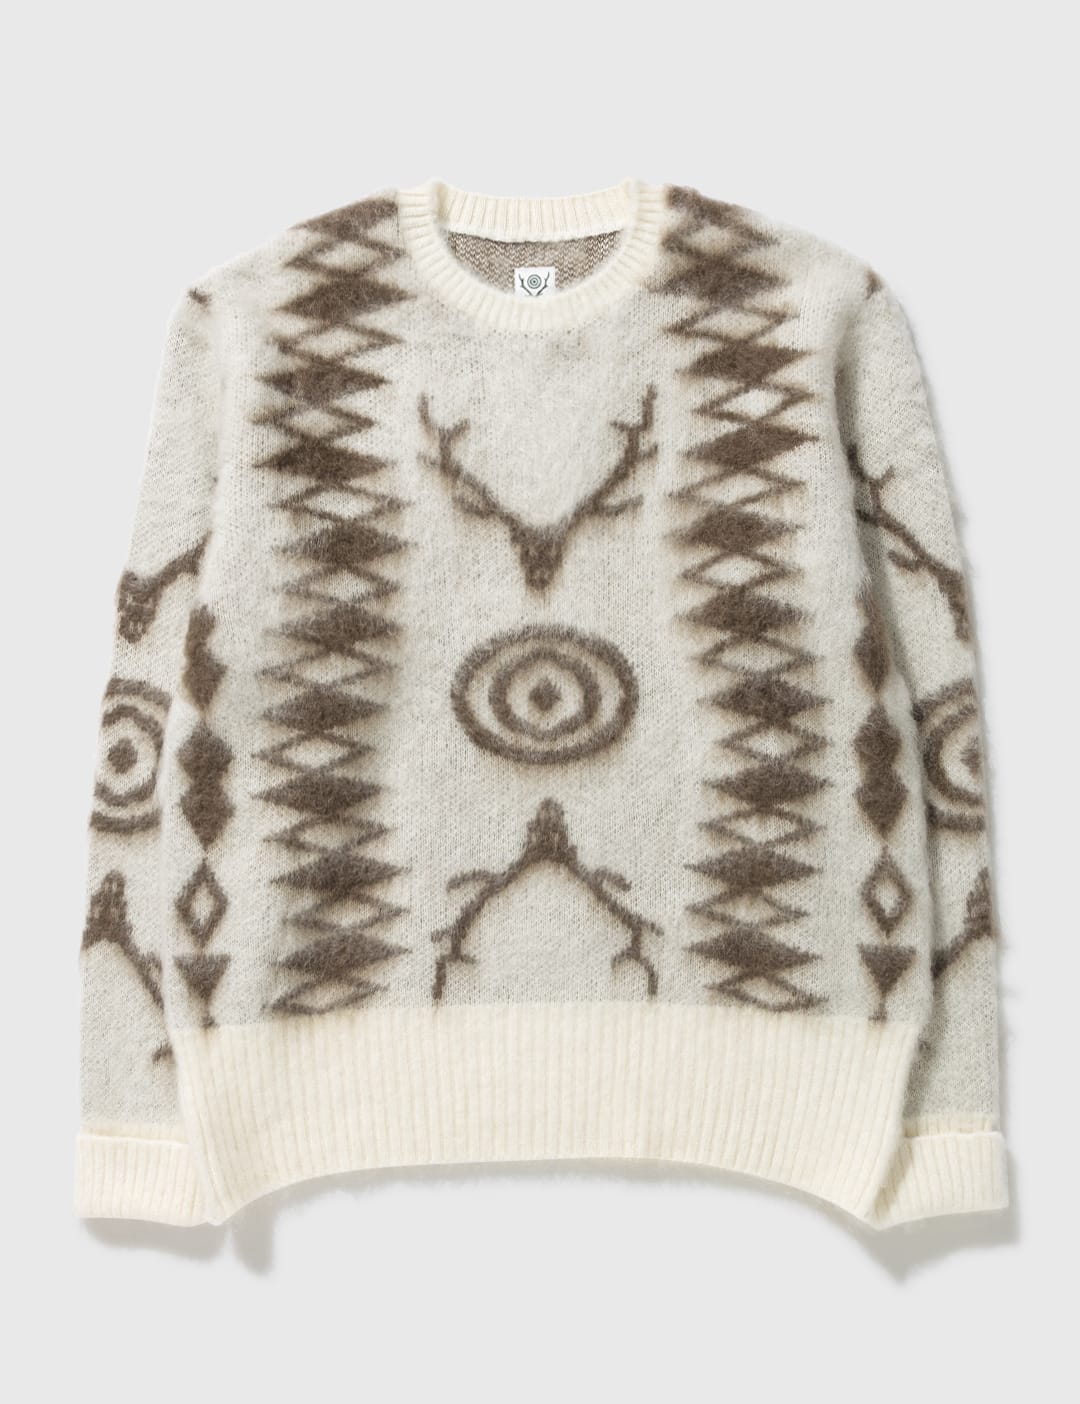 South2 West8 - Loose Fit Sweater | HBX - Globally Curated Fashion 